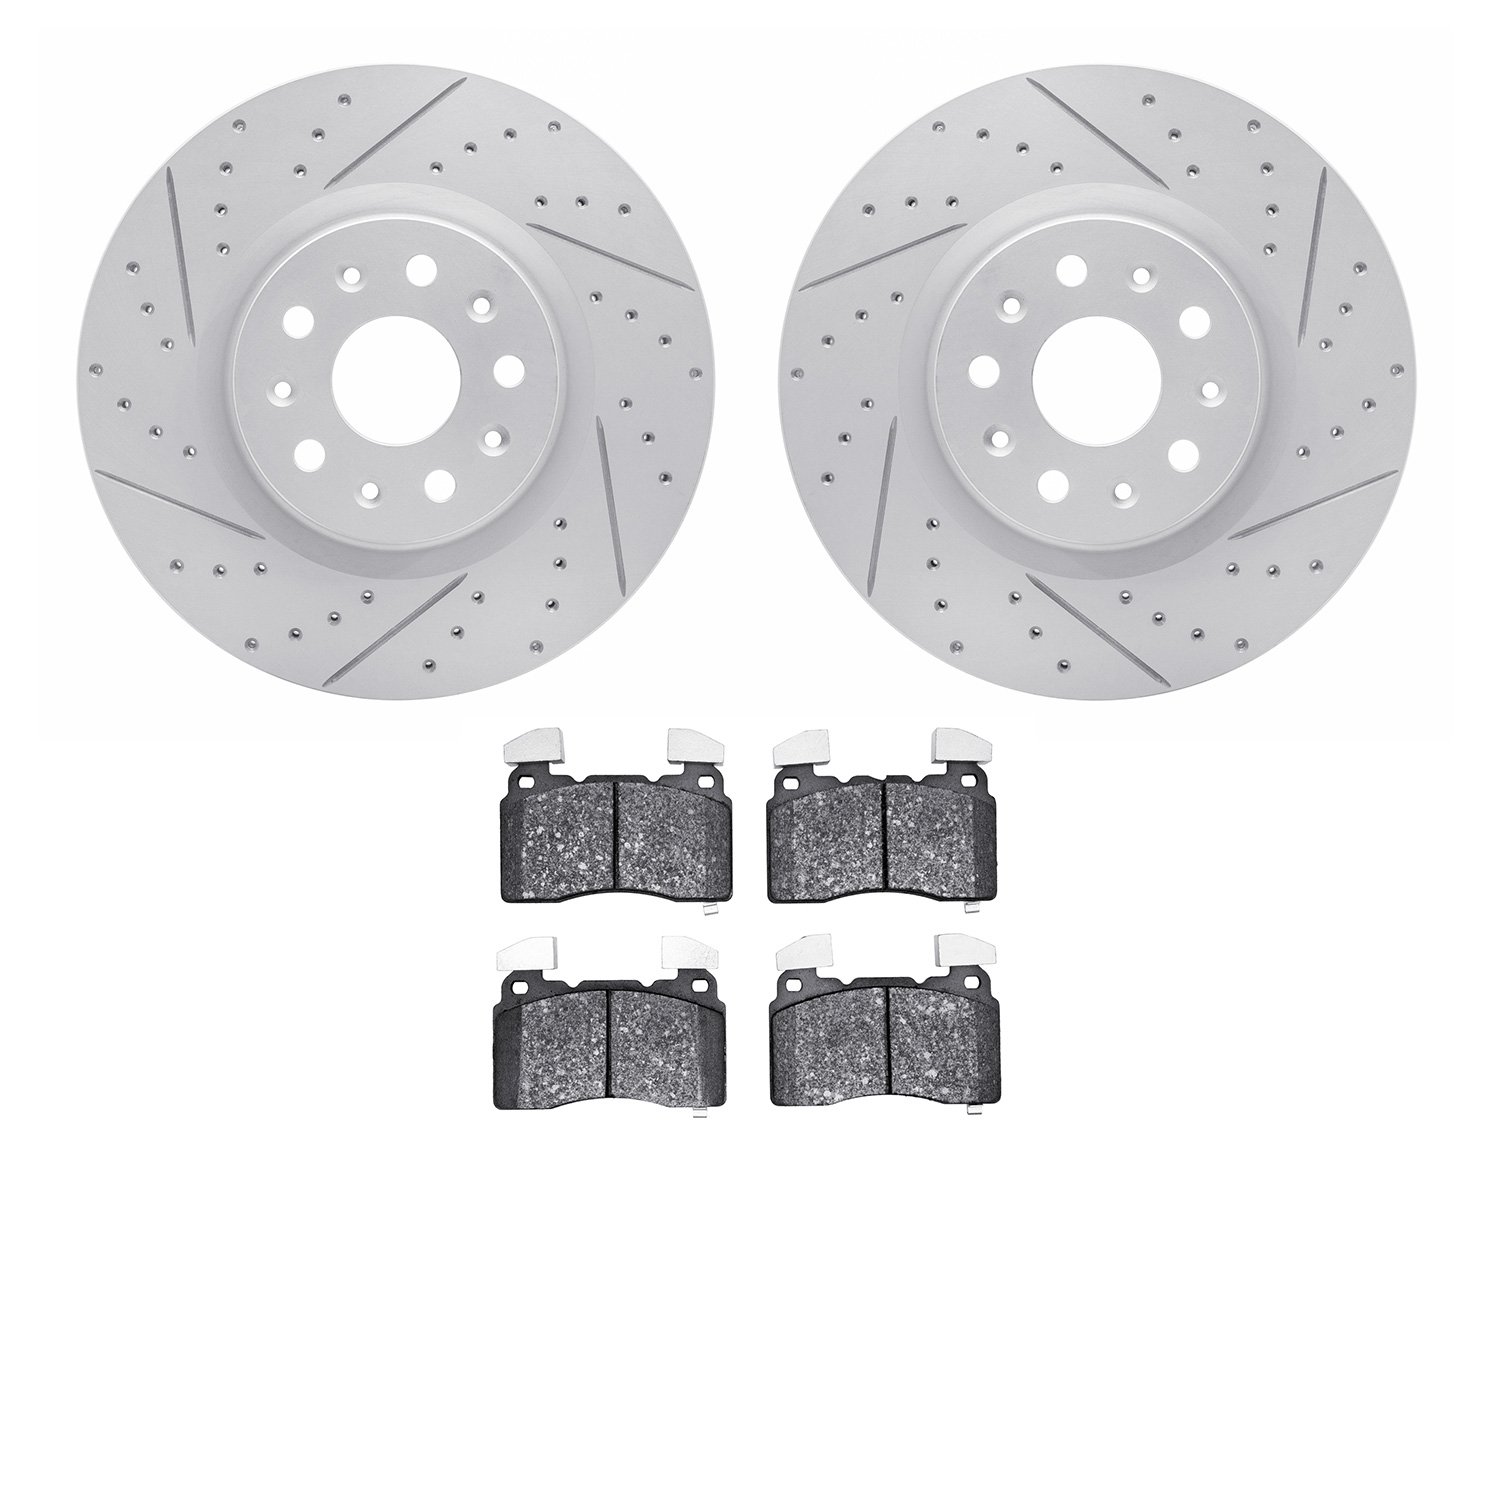 2502-46048 Geoperformance Drilled/Slotted Rotors w/5000 Advanced Brake Pads Kit, Fits Select GM, Position: Front